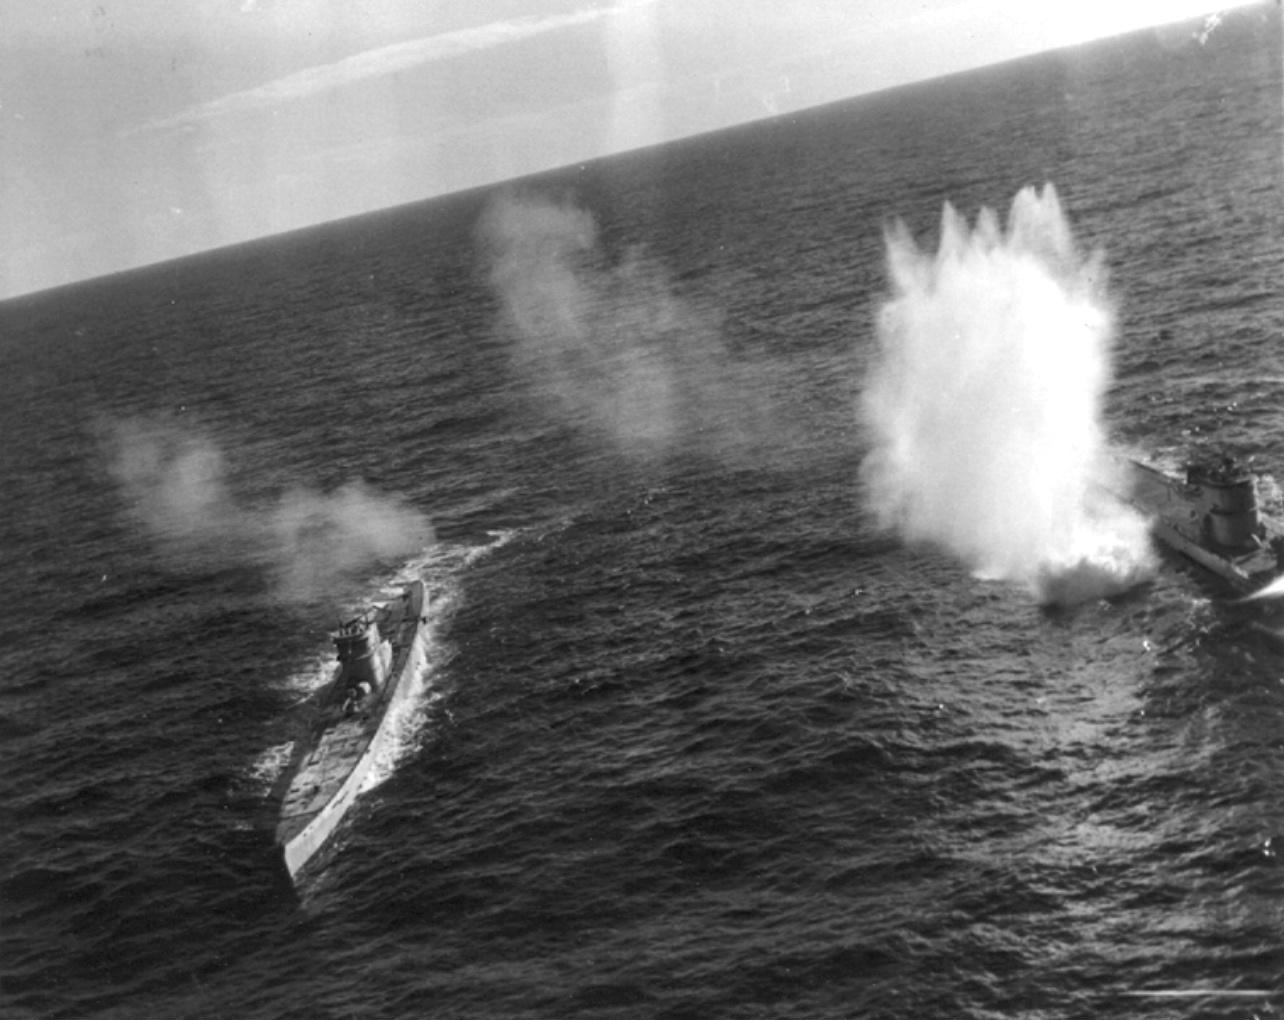 German submarines U-66 (left) and U-117 were caught on the surface in the mid-Atlantic by a coordinated attack by TBF-1 Avengers and F4F Wildcats flying from USS Card, 7 Aug 1943. U-117 was sunk in the attack.